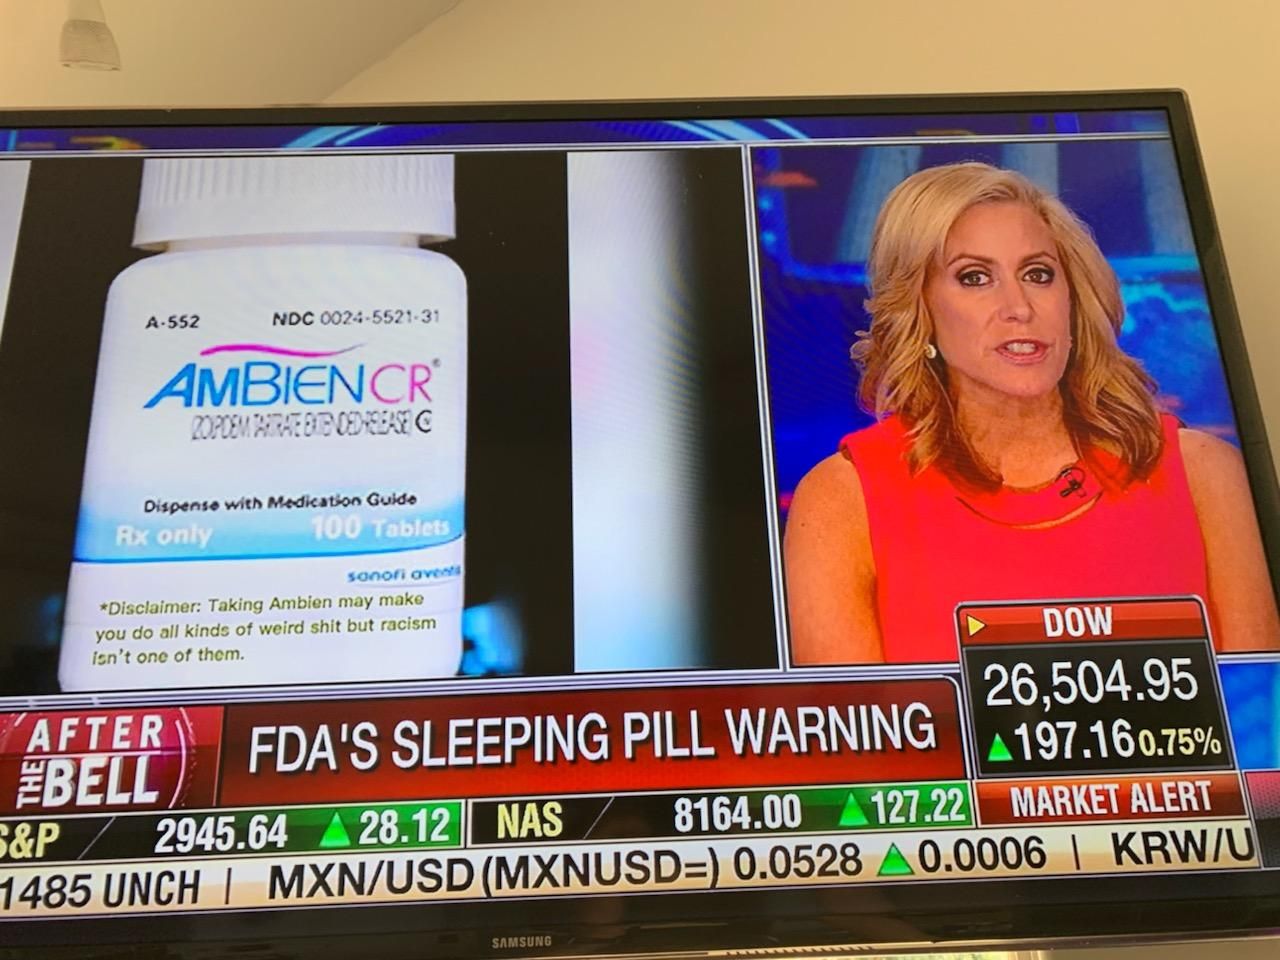 Fox news just aired this photoshopped Ambien label on TV